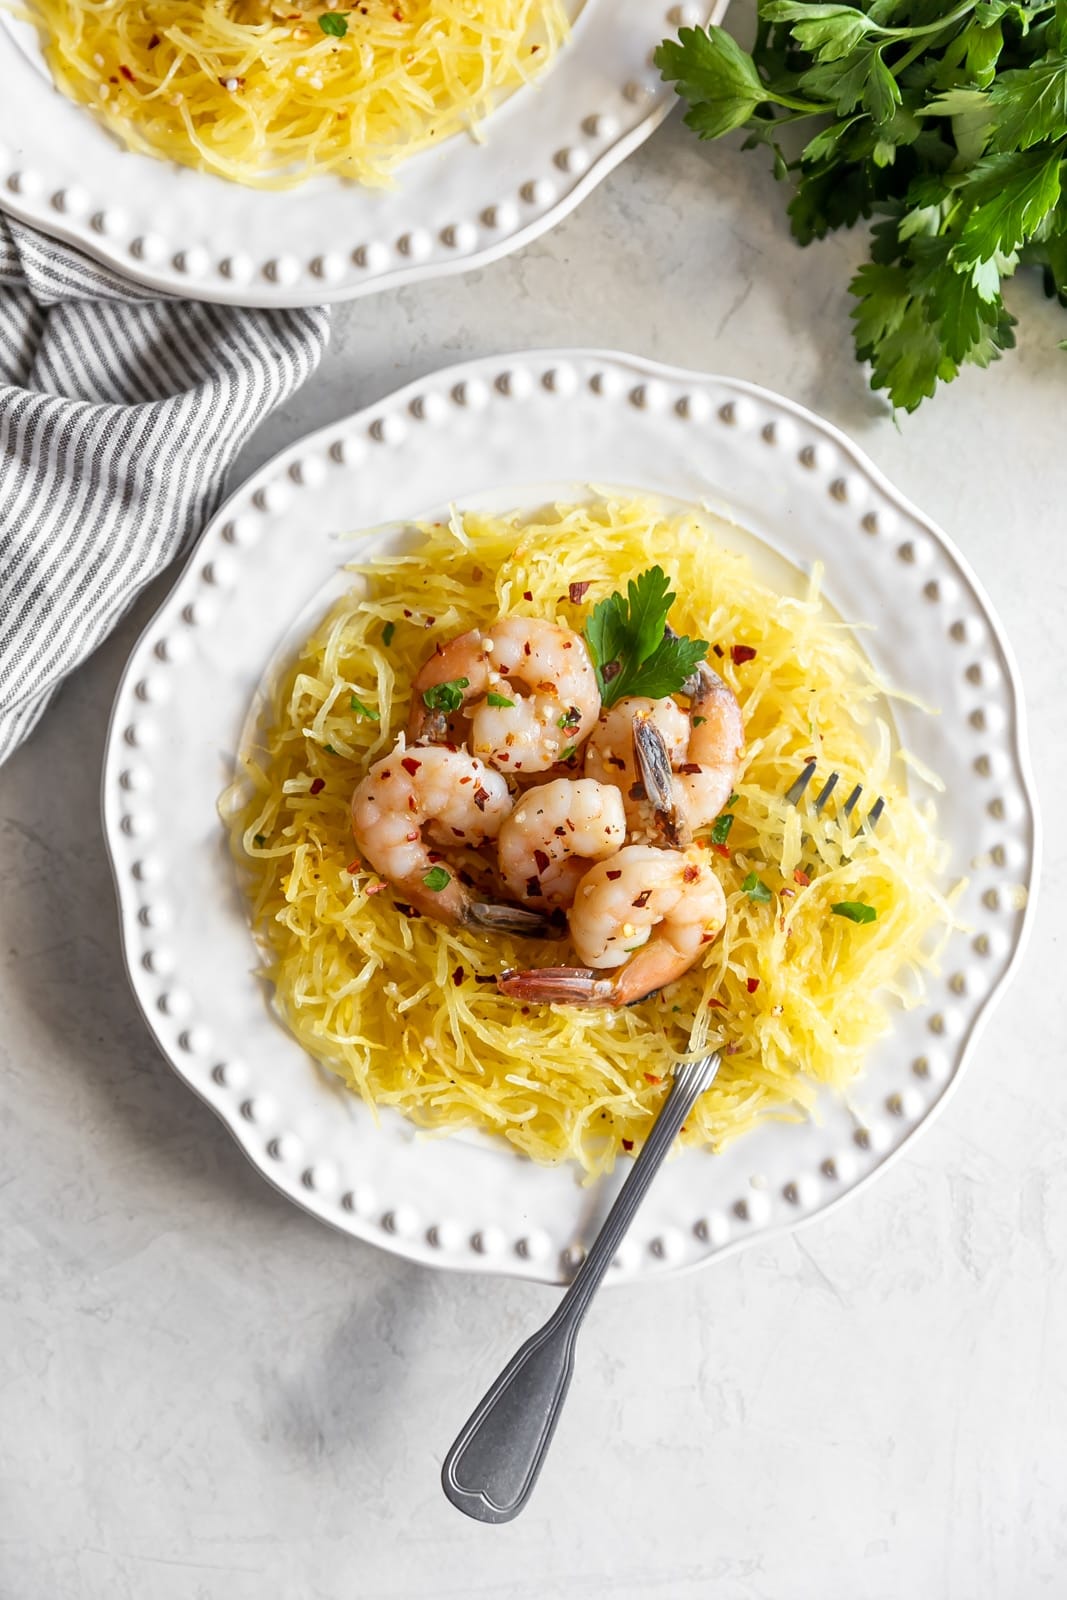 Sautéed shrimp tossed in a quick + easy garlic, red pepper flakes, parsley, white wine, and butter sauce served on top of spaghetti squash.